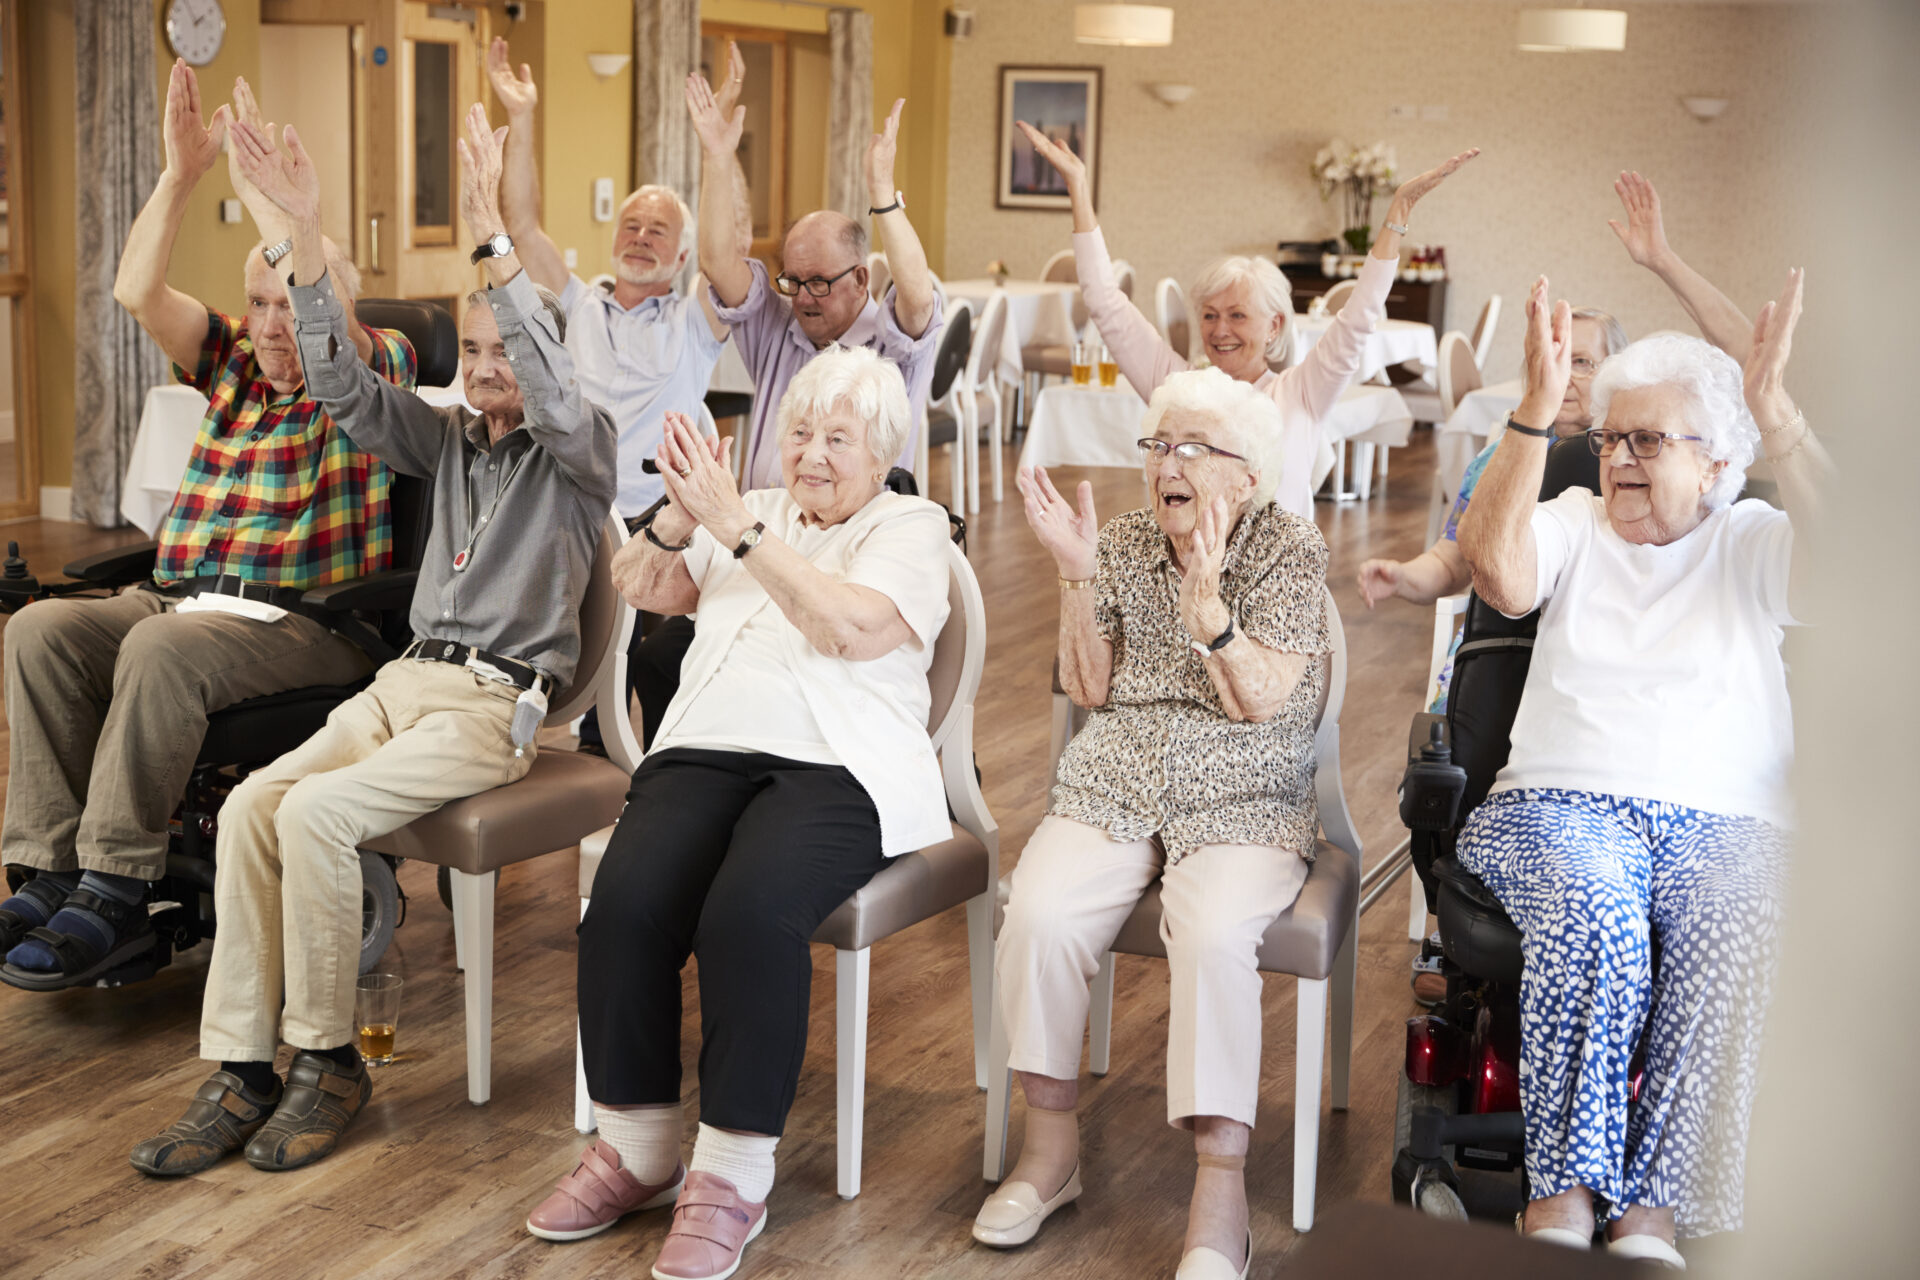 A group of older people clapping and cheering